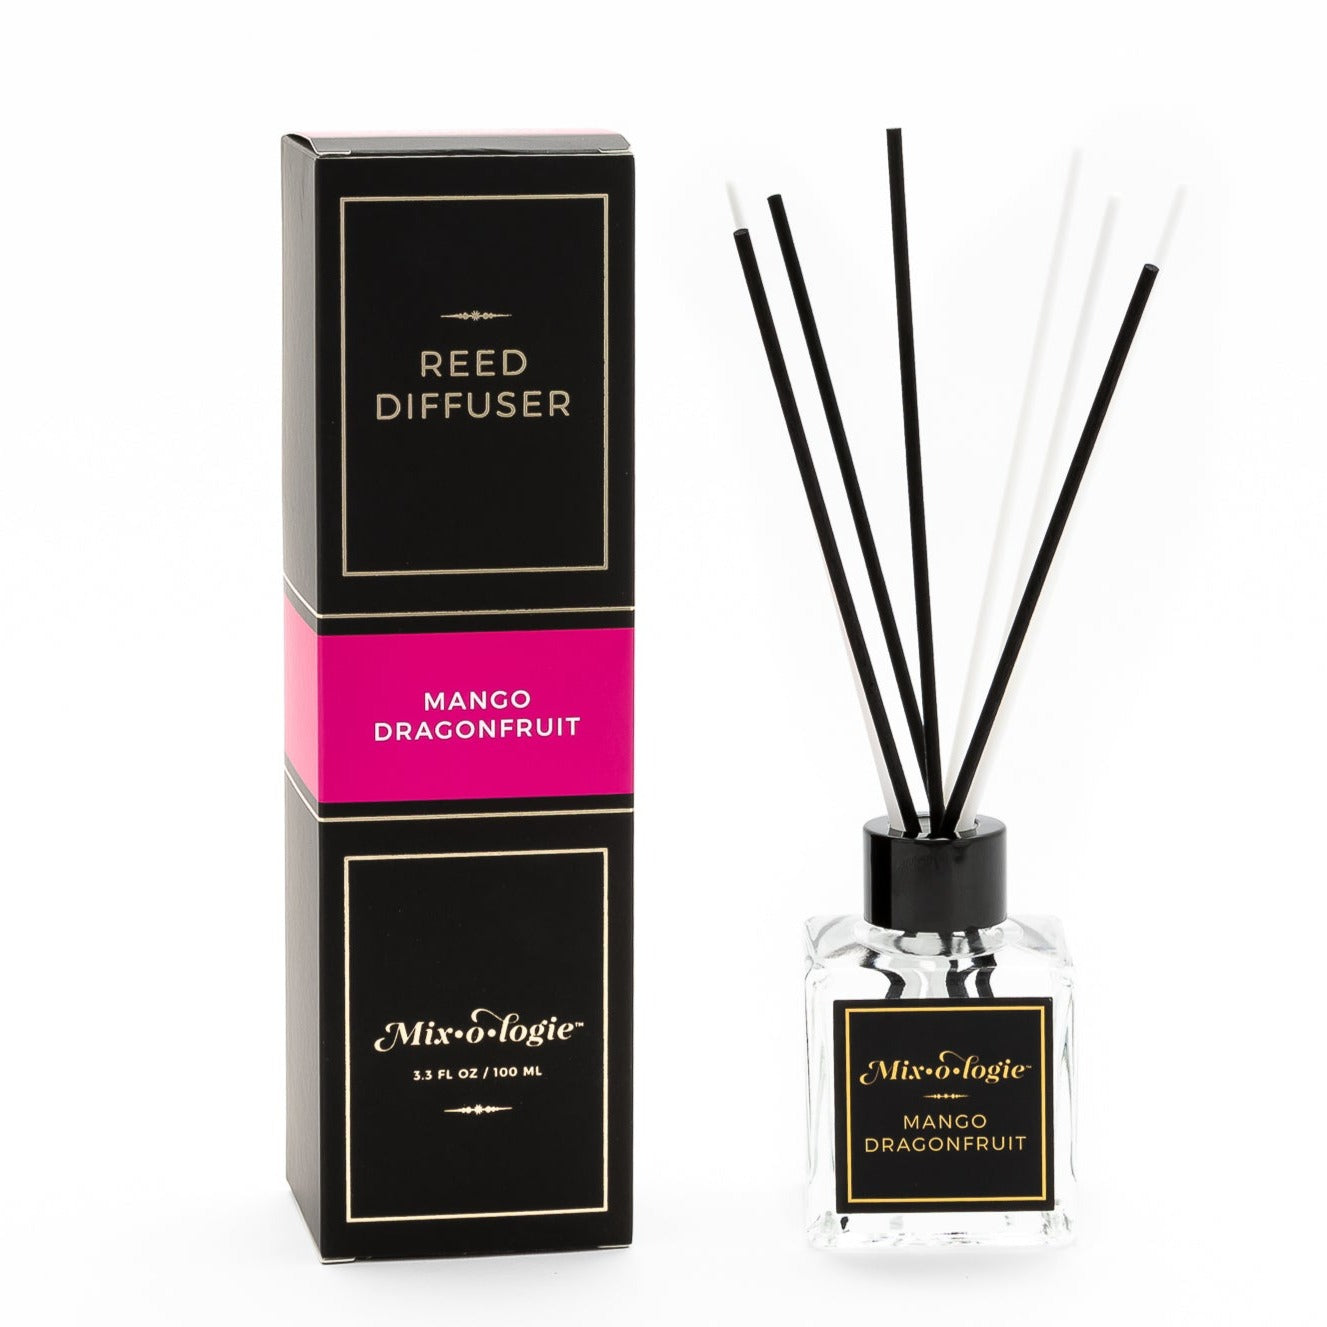 Mango Dragonfruit Reed Diffuser is a clear square glass container with black label that says Mixologie – Mango Dragonfruit. Has a black top and 4 white & 4 black reed sticks coming out of top, is 3.3 fl oz or 100 mL of clear scented liquid. Black rectangle package box with bright pink label. Box and diffuser are pictured with white background.